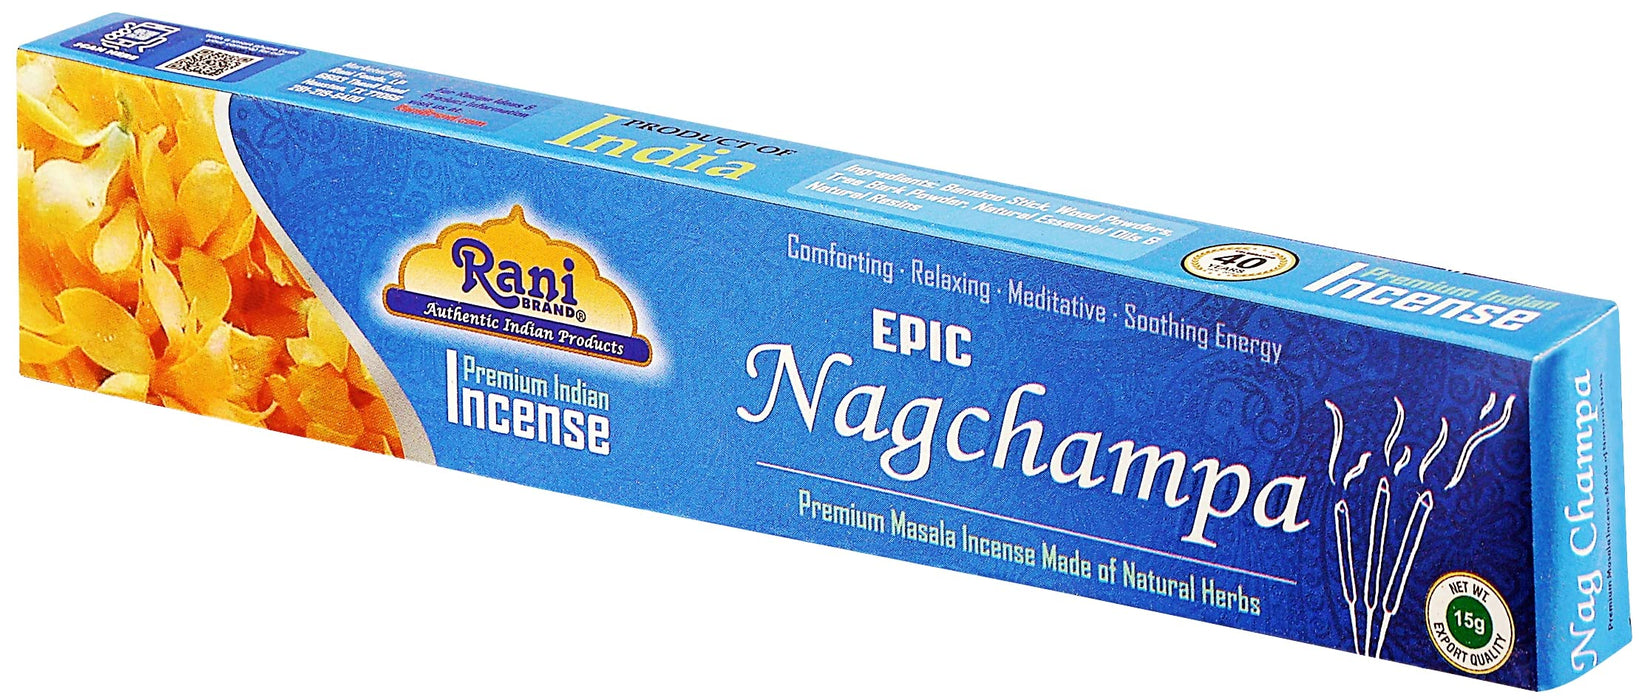 Rani Epic Nagchampa Incense (Premium Masala Incense Made of Natural Herbs) 15g x 10 Packets ~ Total of 100 Incense sticks | For Puja Purposes | Indian Origin